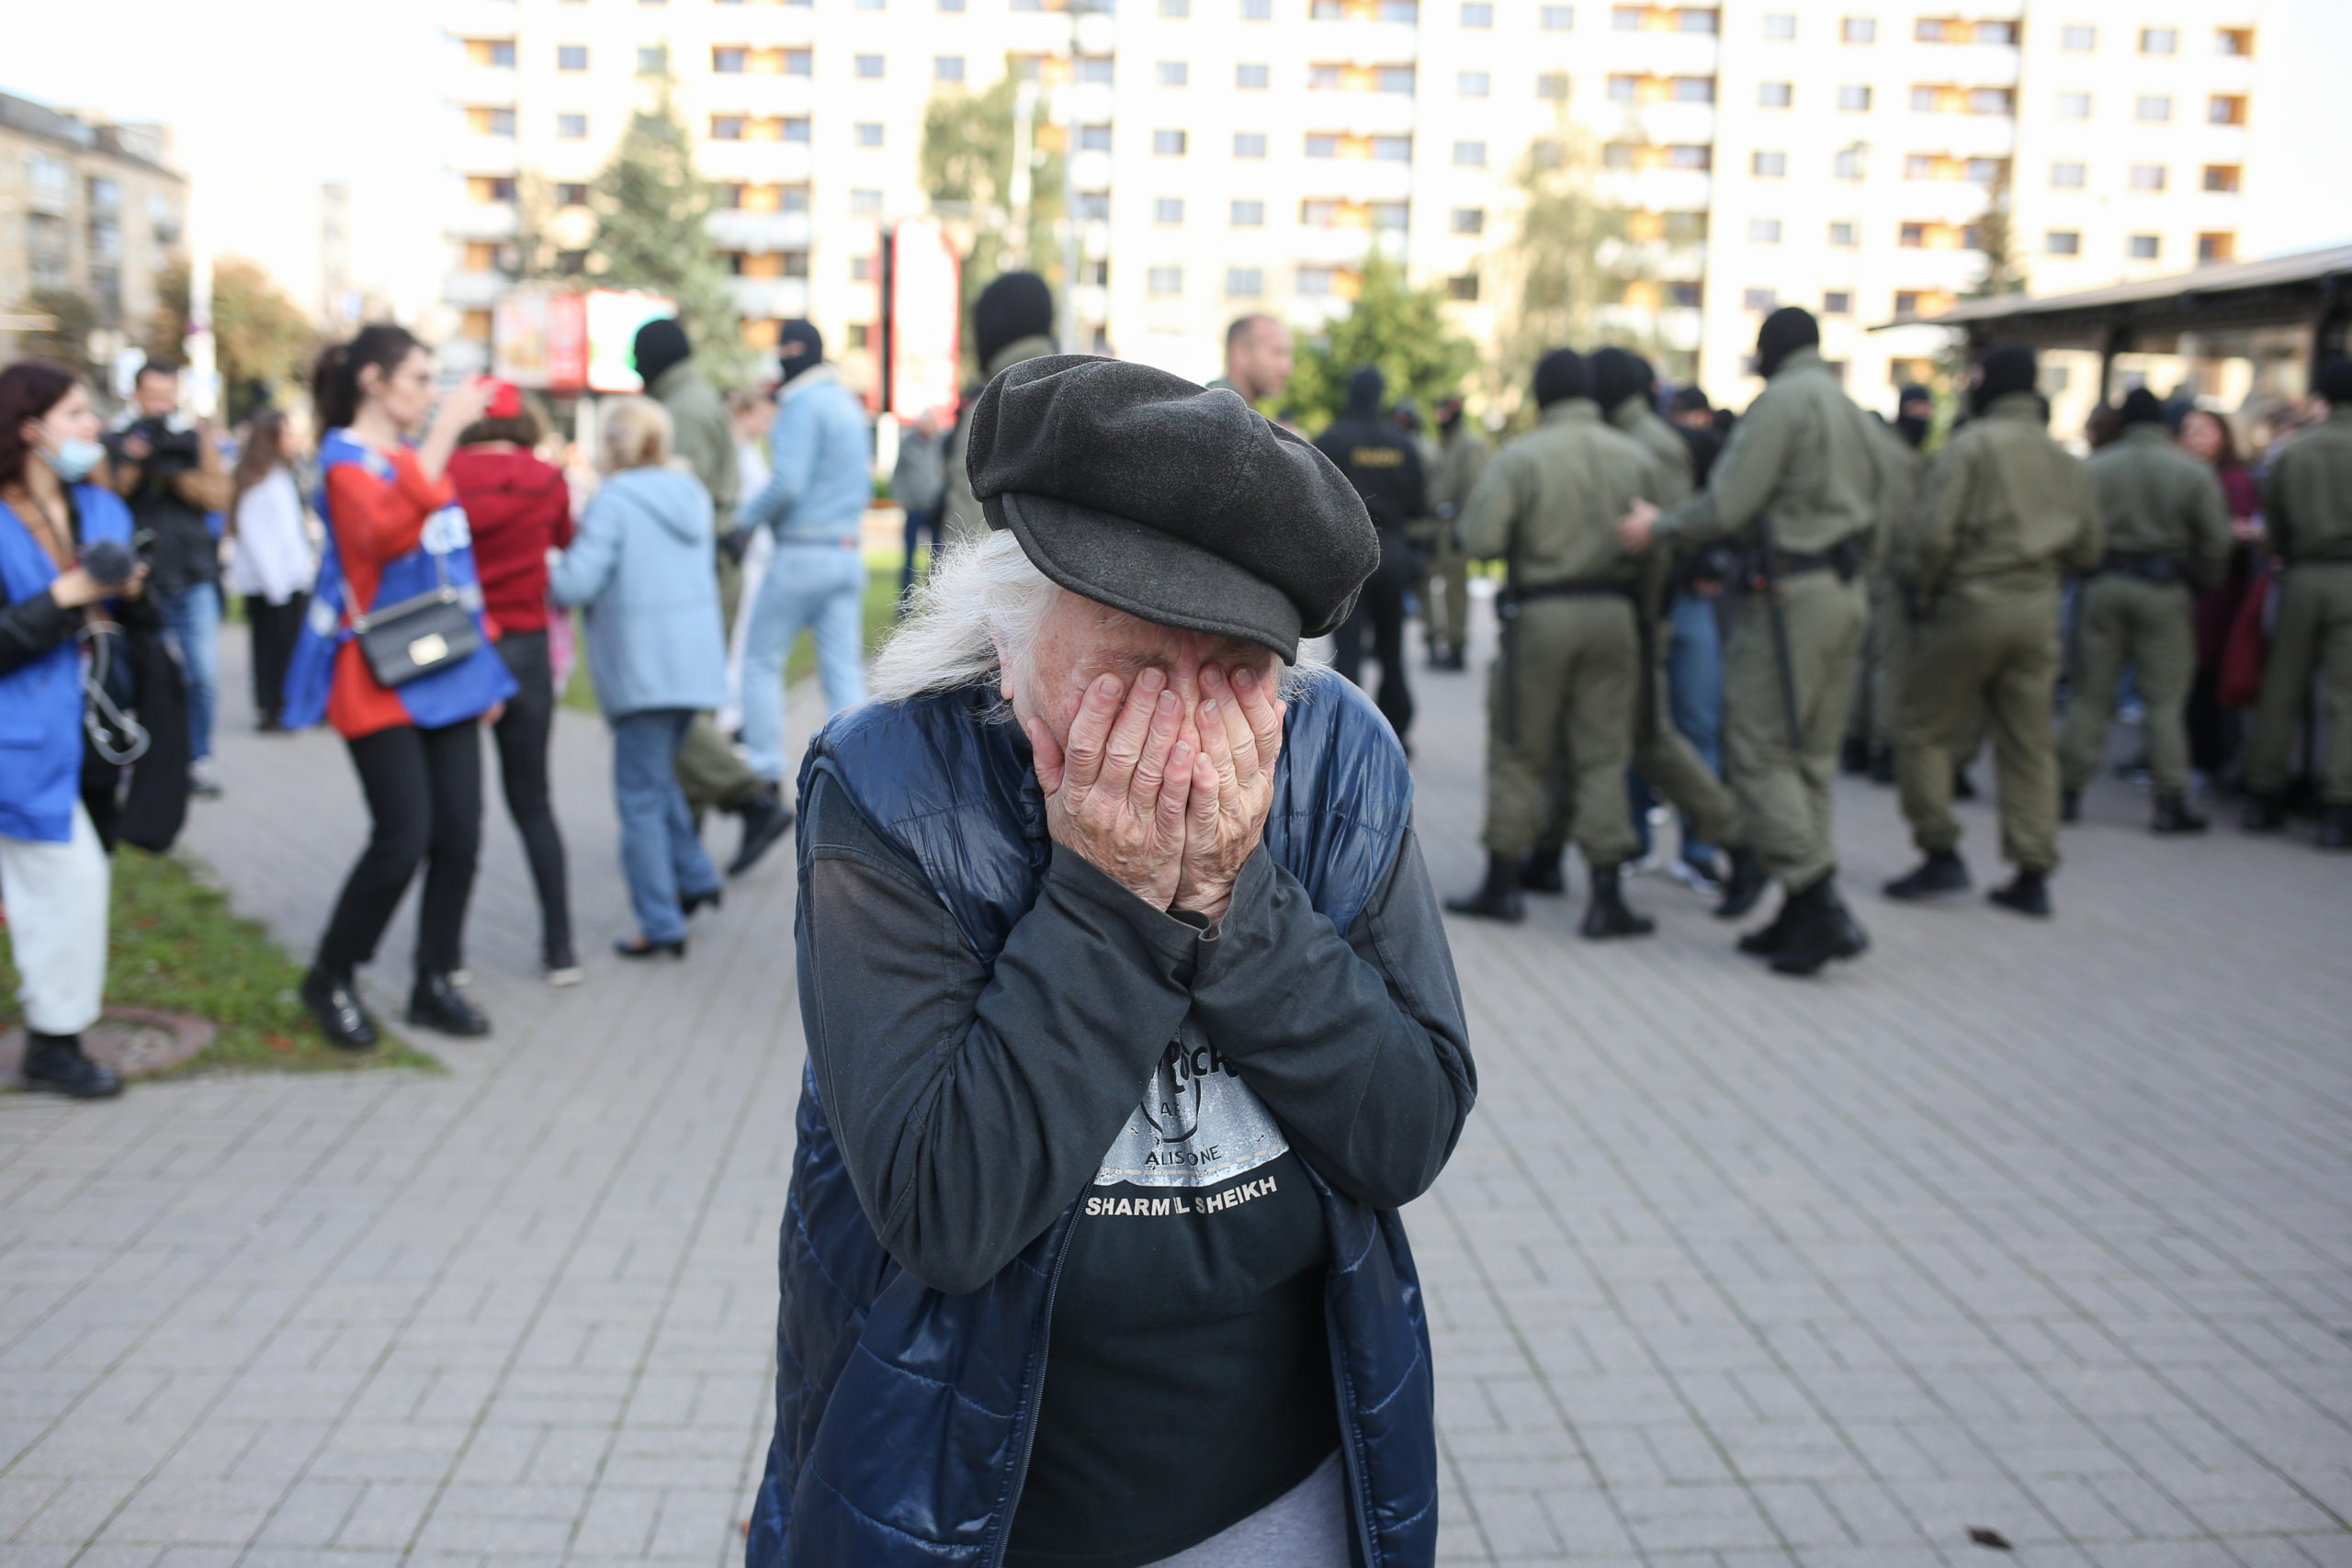 An elderly woman cries after the arrests during the protests. Minsk, September 2020.